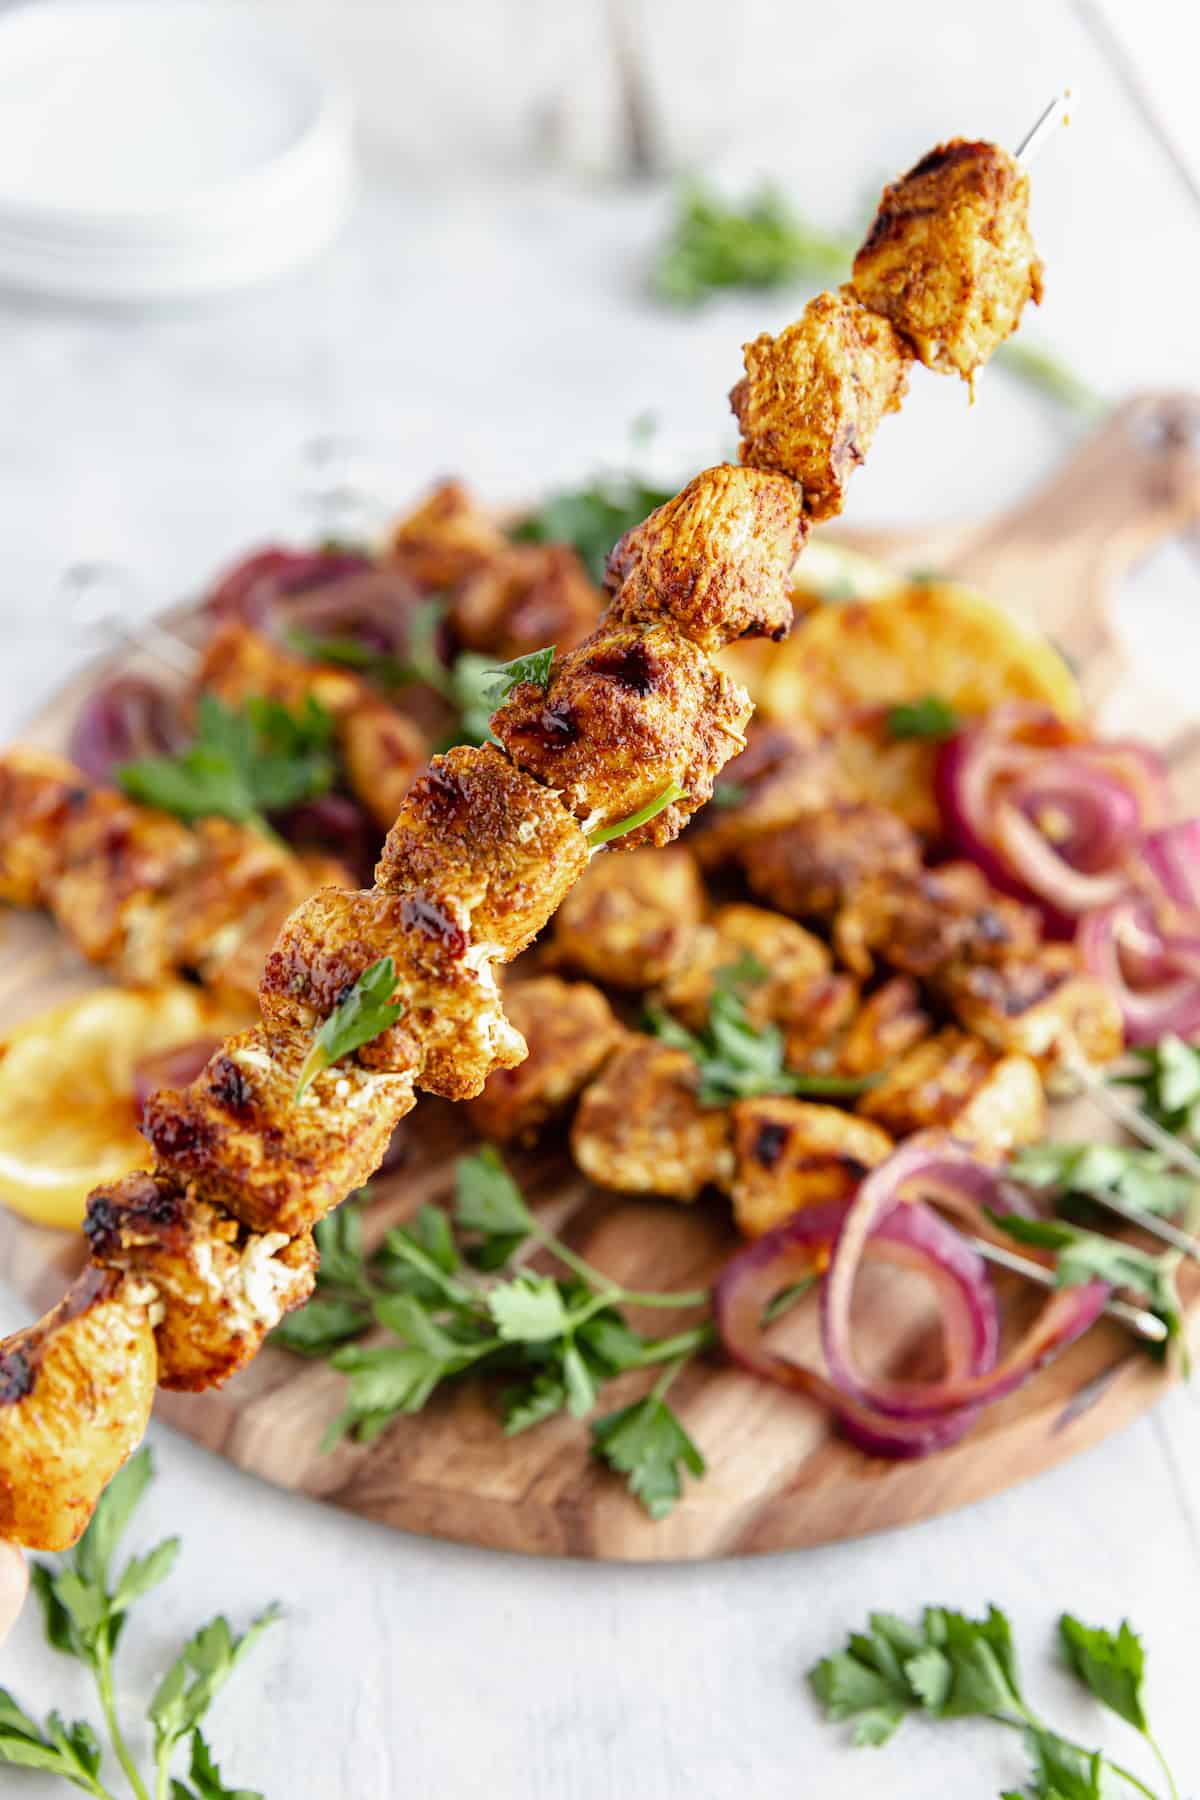 A Shawarma Grilled Chicken Skewer Being Held Above a Platter Containing More Kebabs